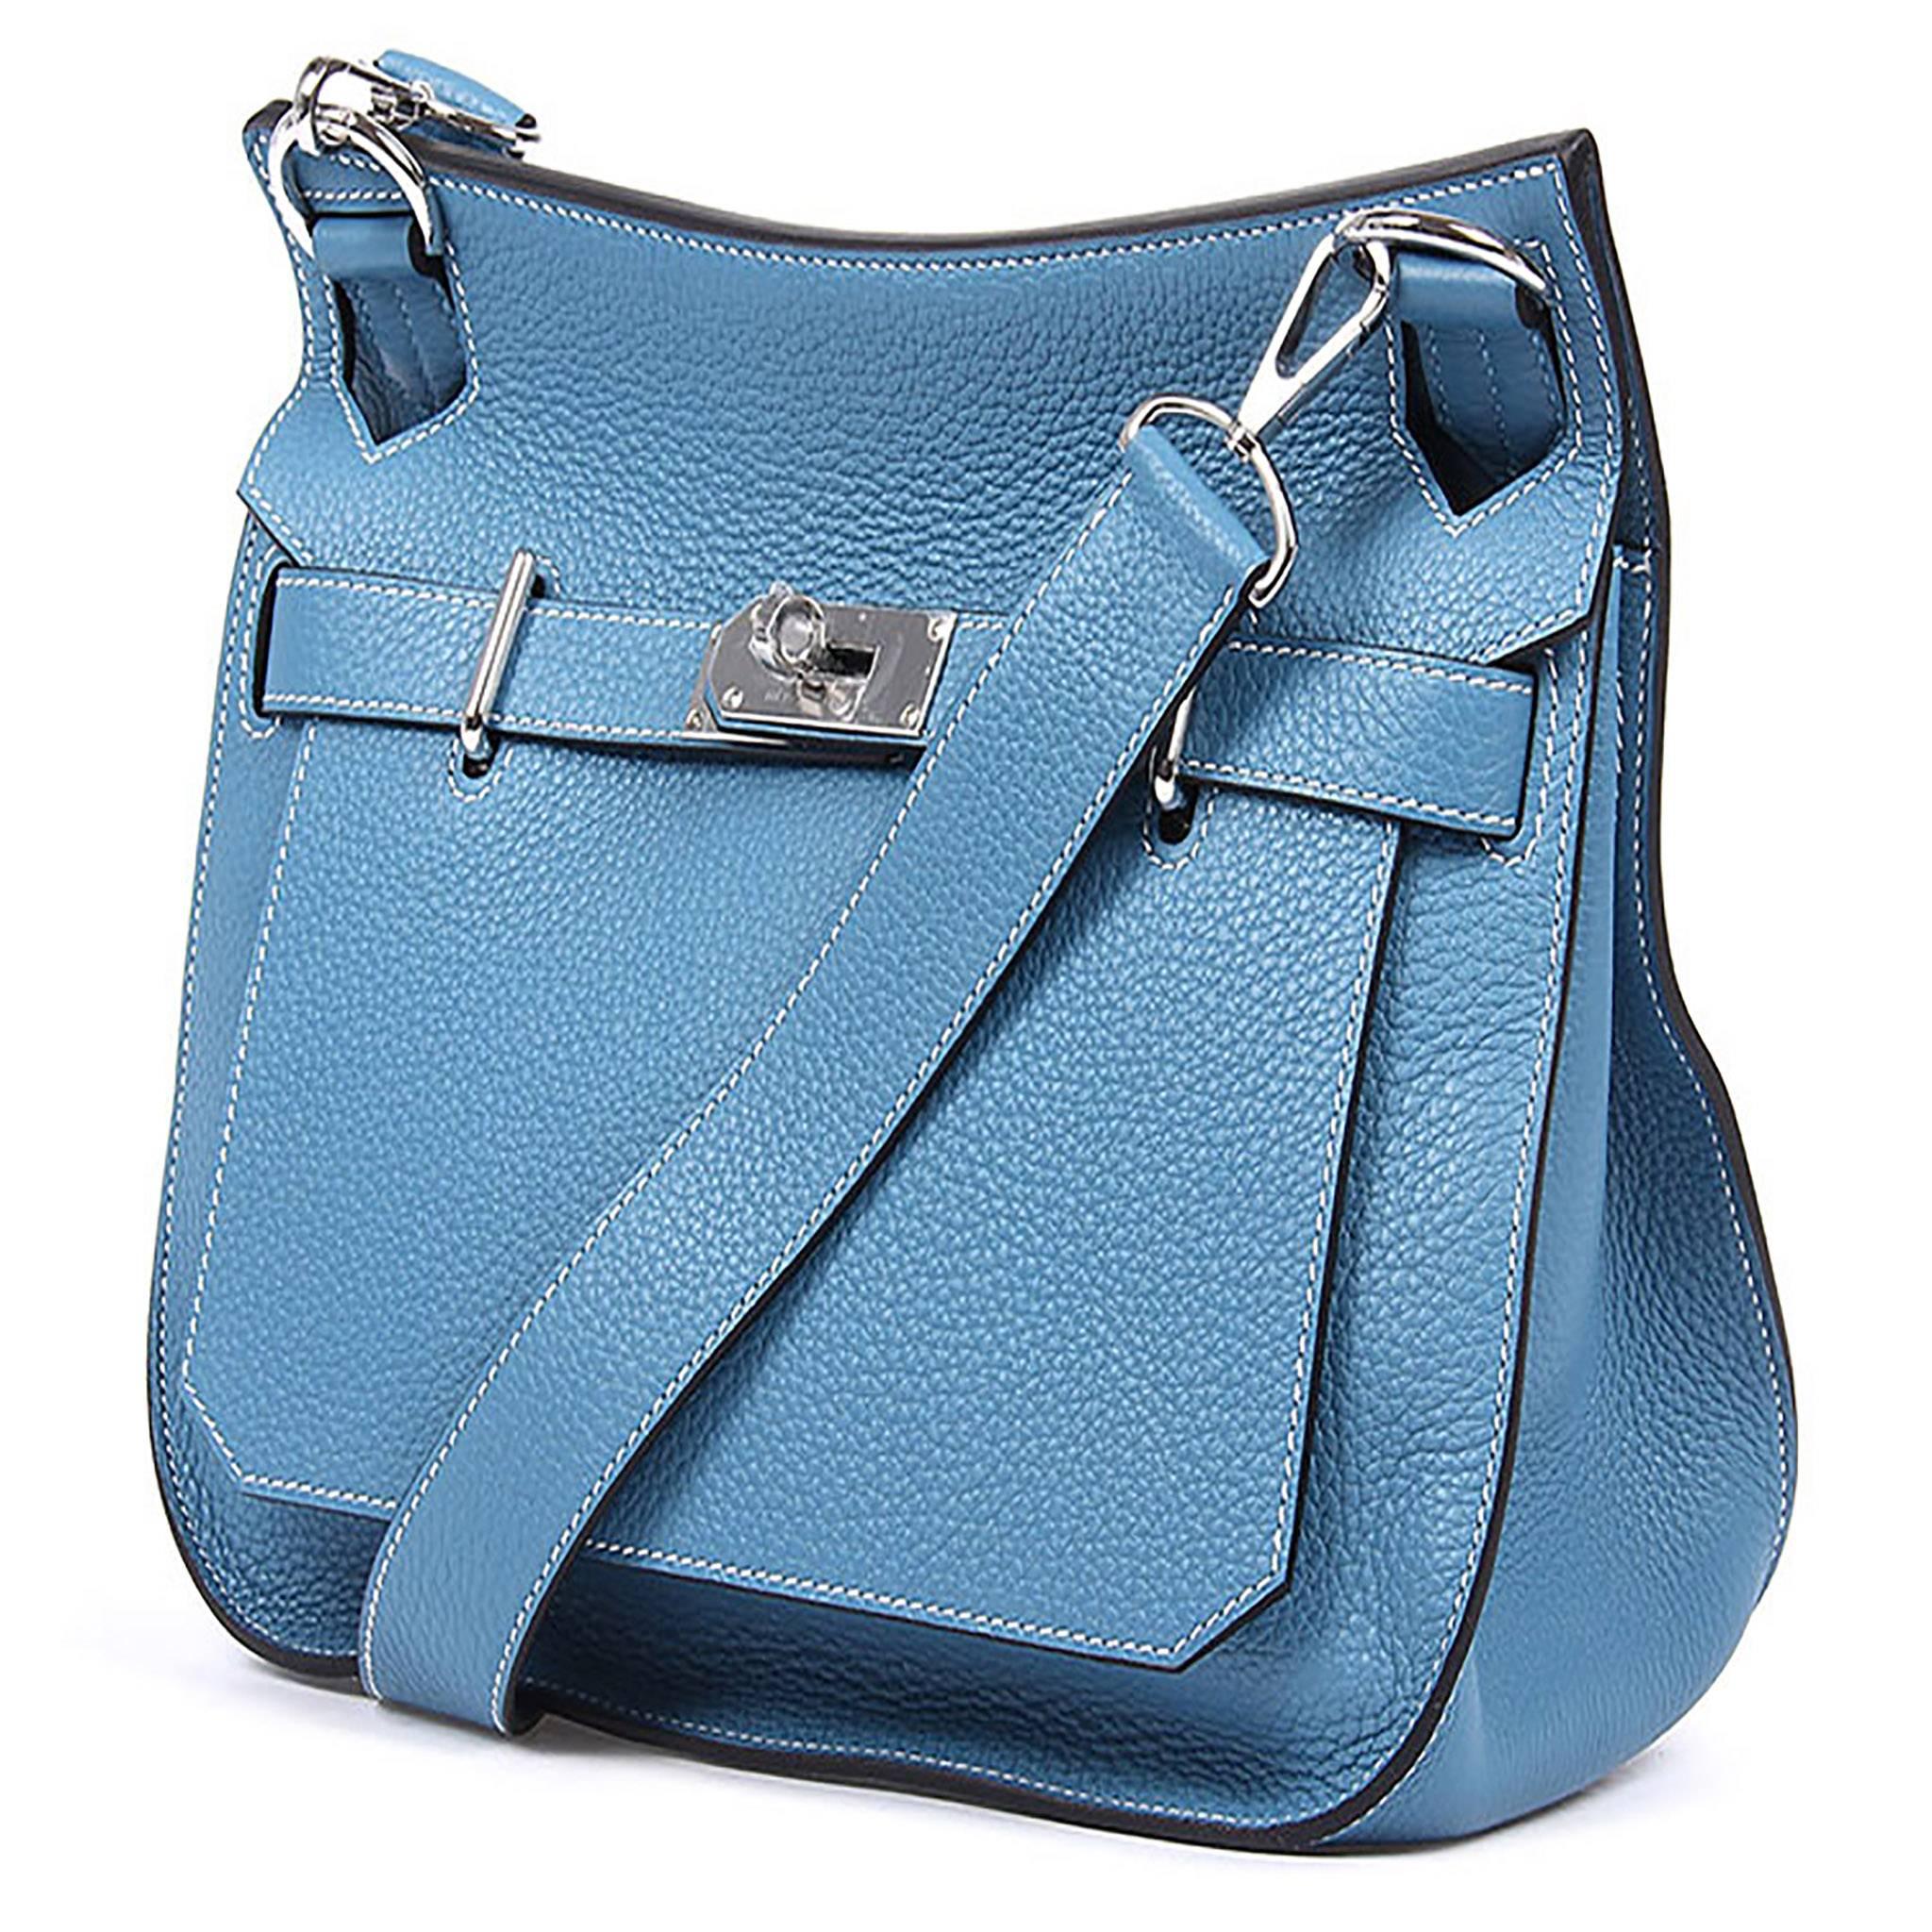 HERMES Jypsiere 28 T. Clemence Leather Blue Jean Color PHW

Pristine condition. Pre-owned and never used

Model: Jypsiere

Composition: T. Clemence

Color: 75 Blue Jean

Hardware: Palladium

Measures: 11.02 inch W x 9.44 H inch X 5.51 inch D / 28 cm